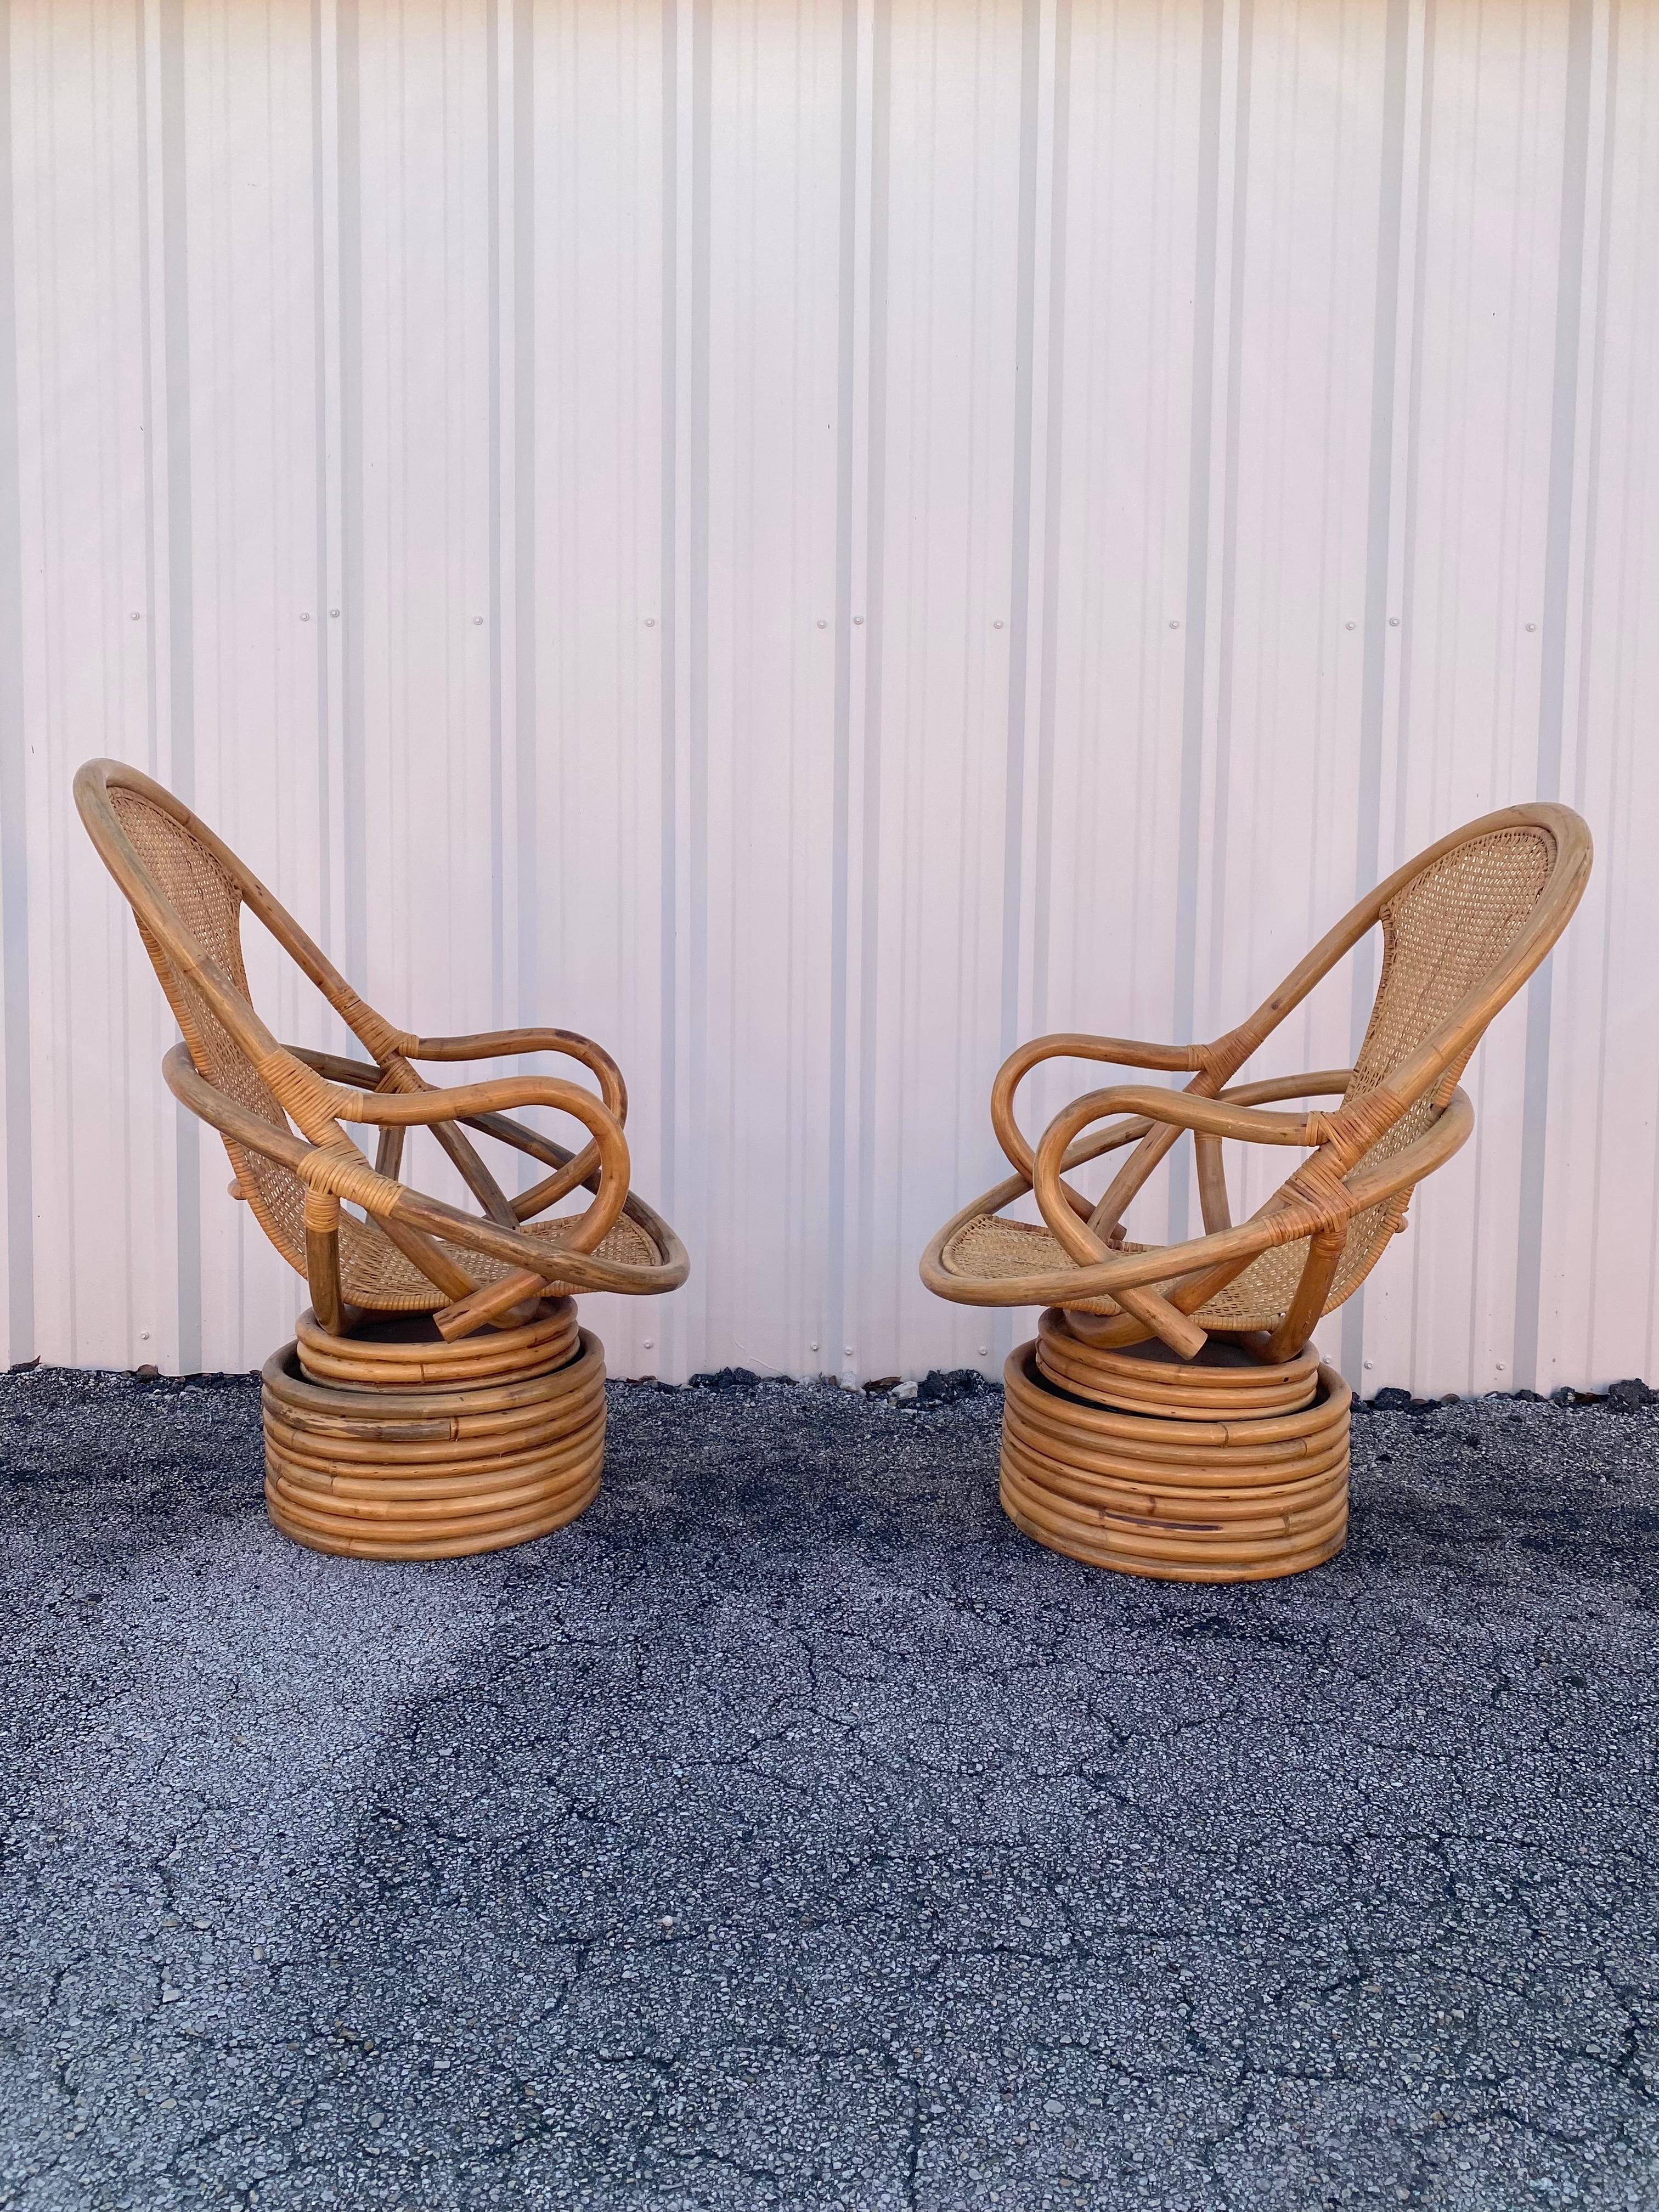 1980s Rattan Coastal Sculptural Swivel Chairs, set of 2 For Sale 1